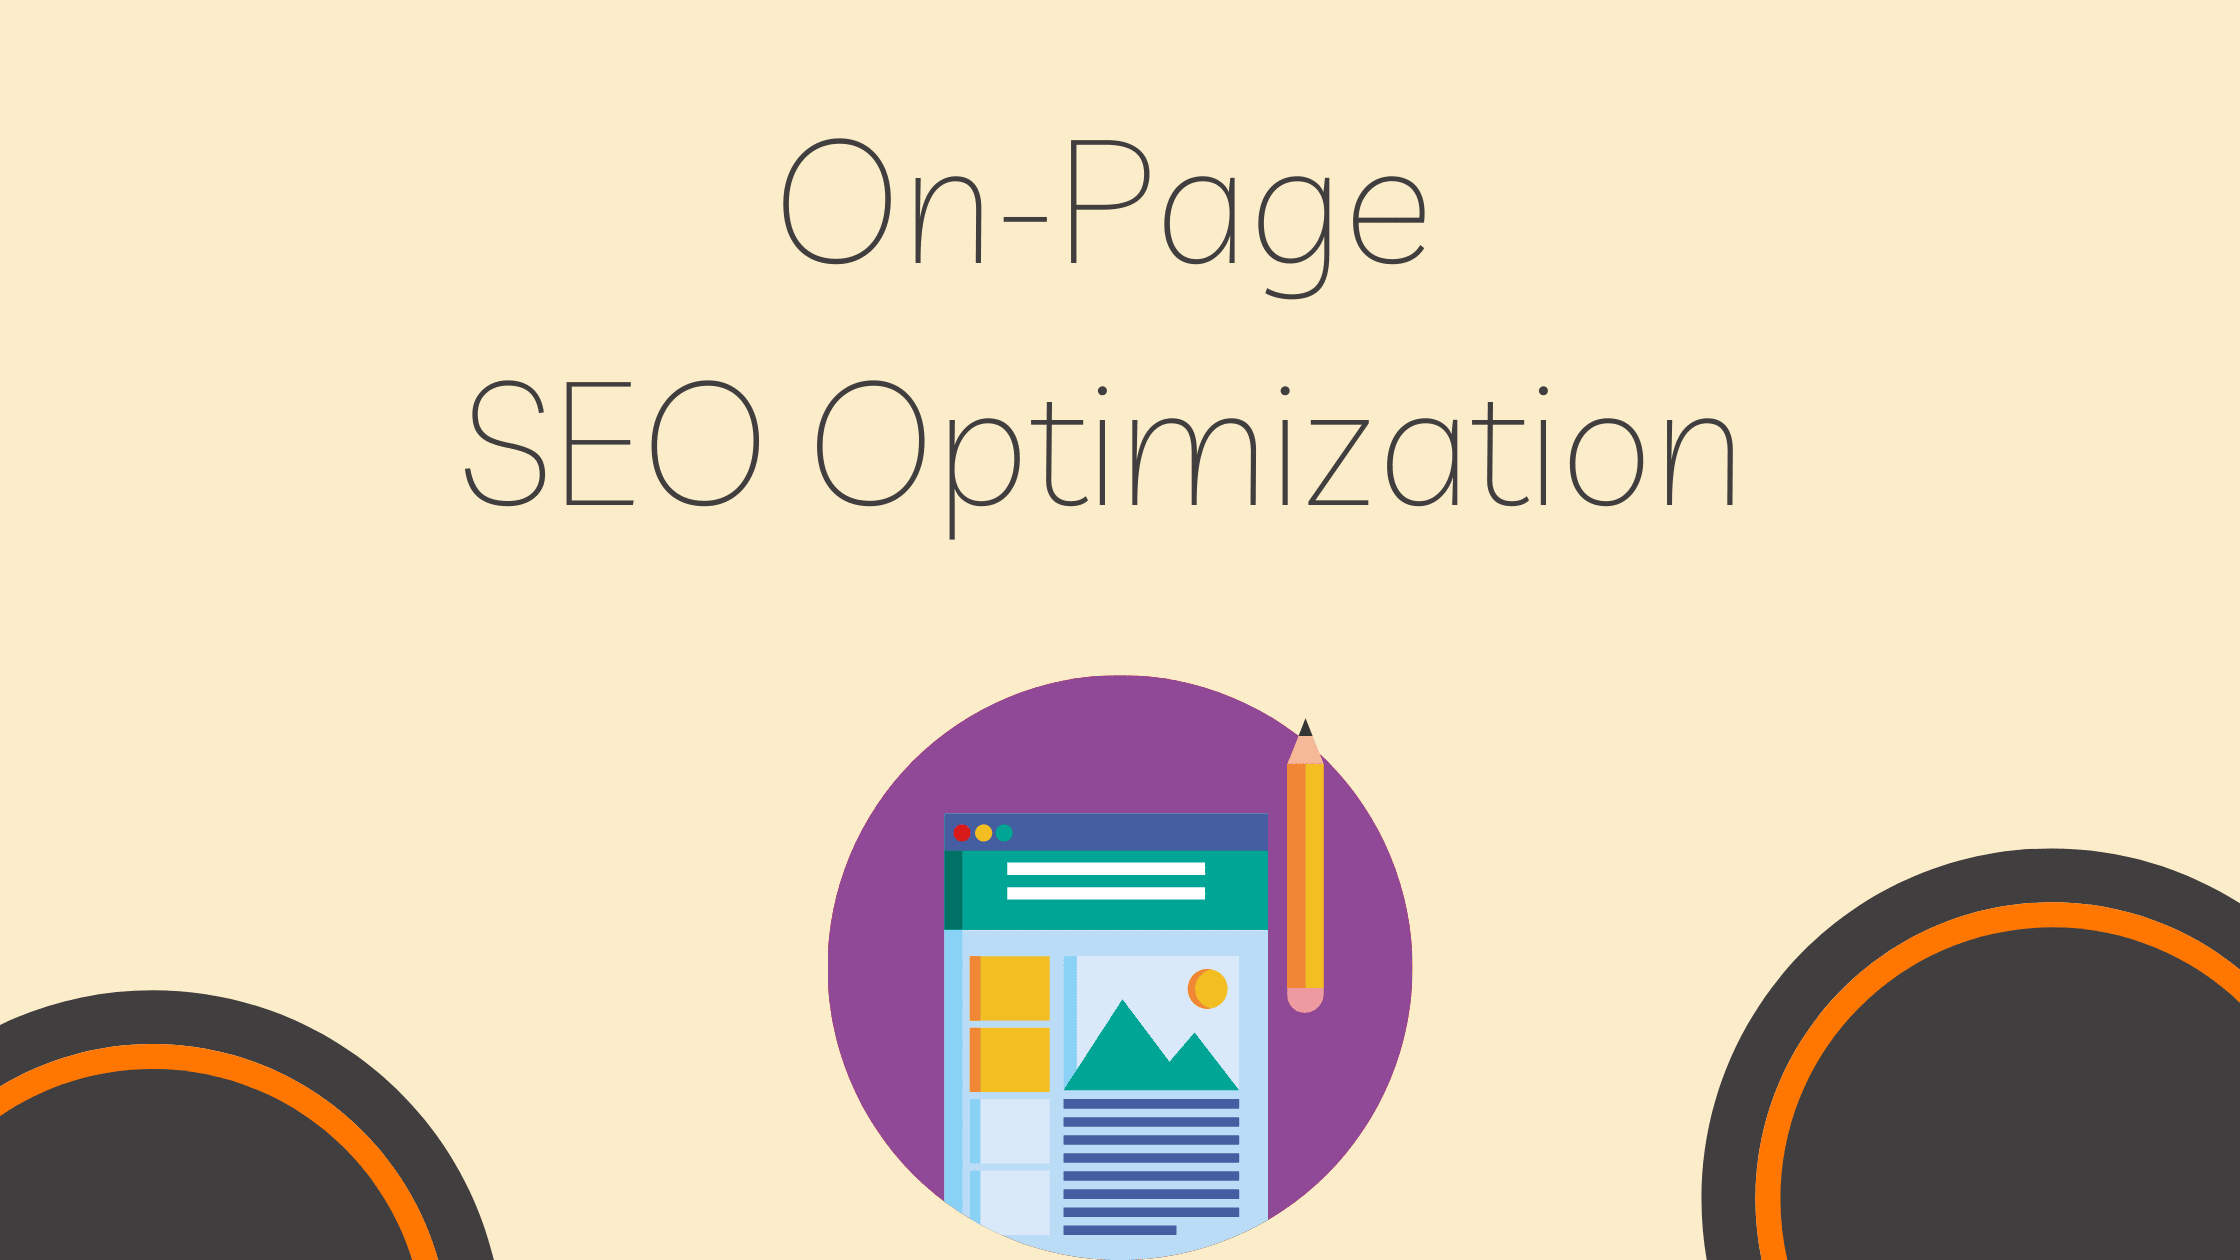 Inbound Marketing and On-Page SEO Optimization